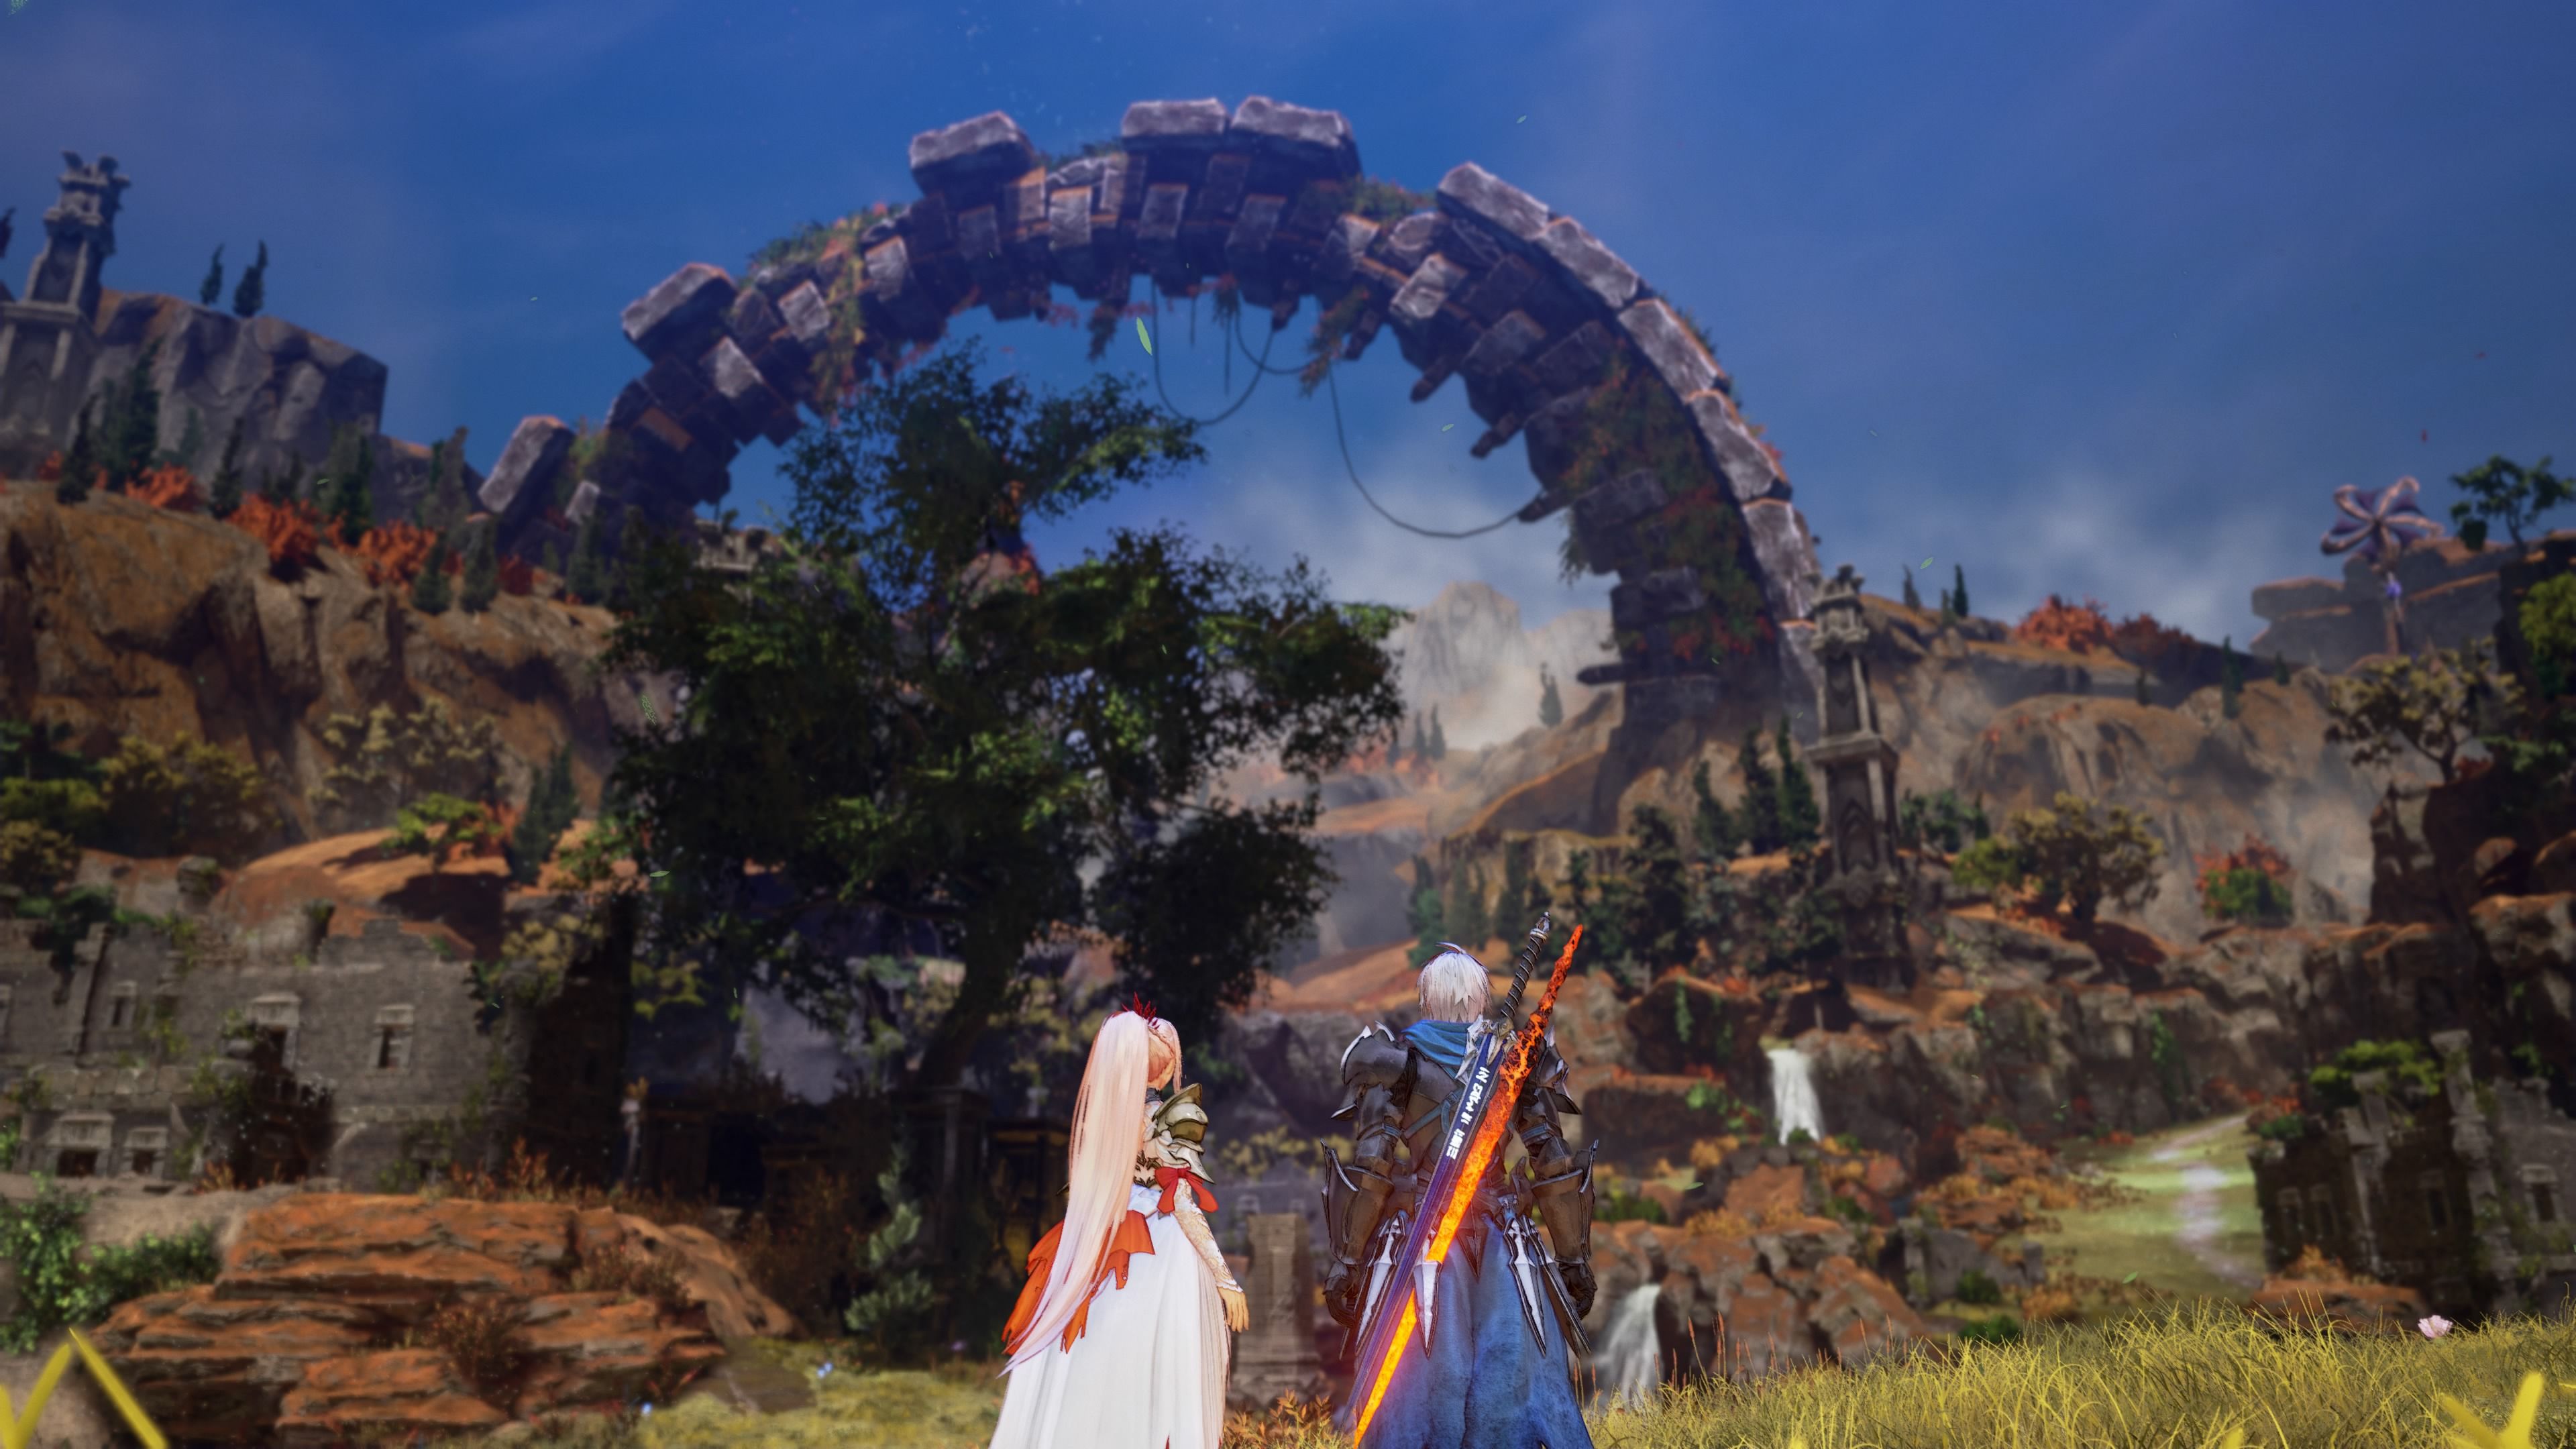 Alphen and Shionne approaching Mahag Saar in Tales of Arise: Beyond the Dawn